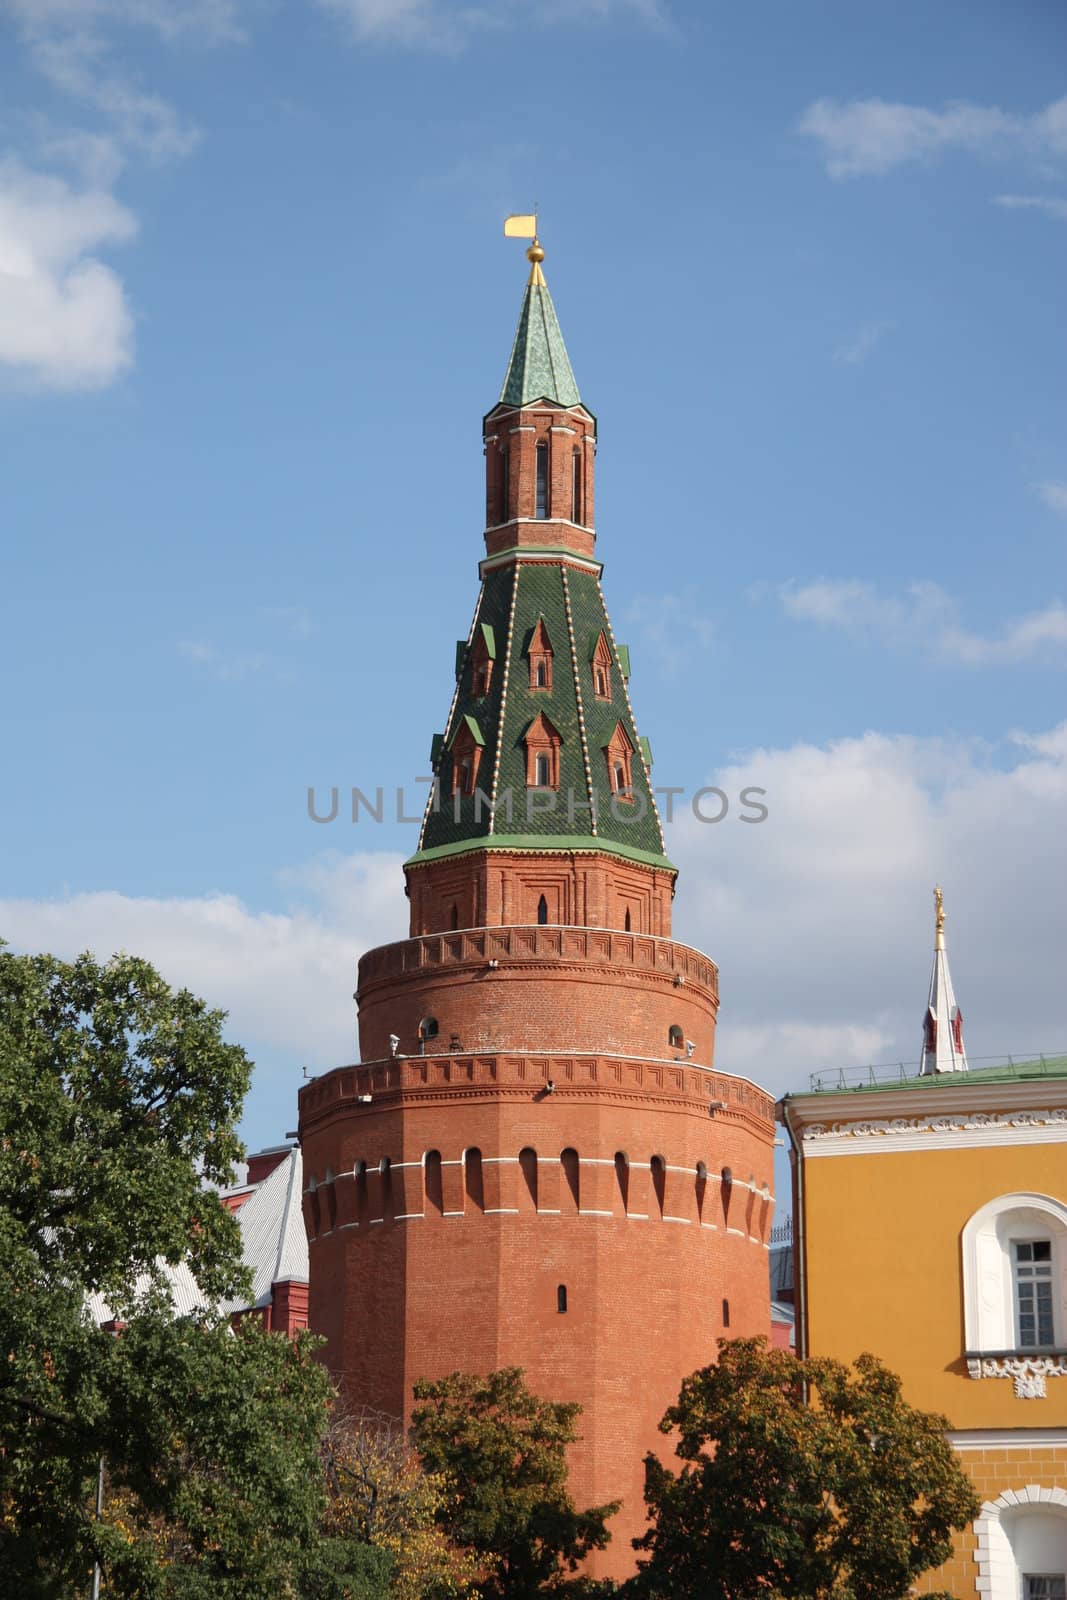 The Angle Arsenal tower (Arsenalnaya Tower) of Kremlin wall over blue cloudy sky, Moscow, Russia